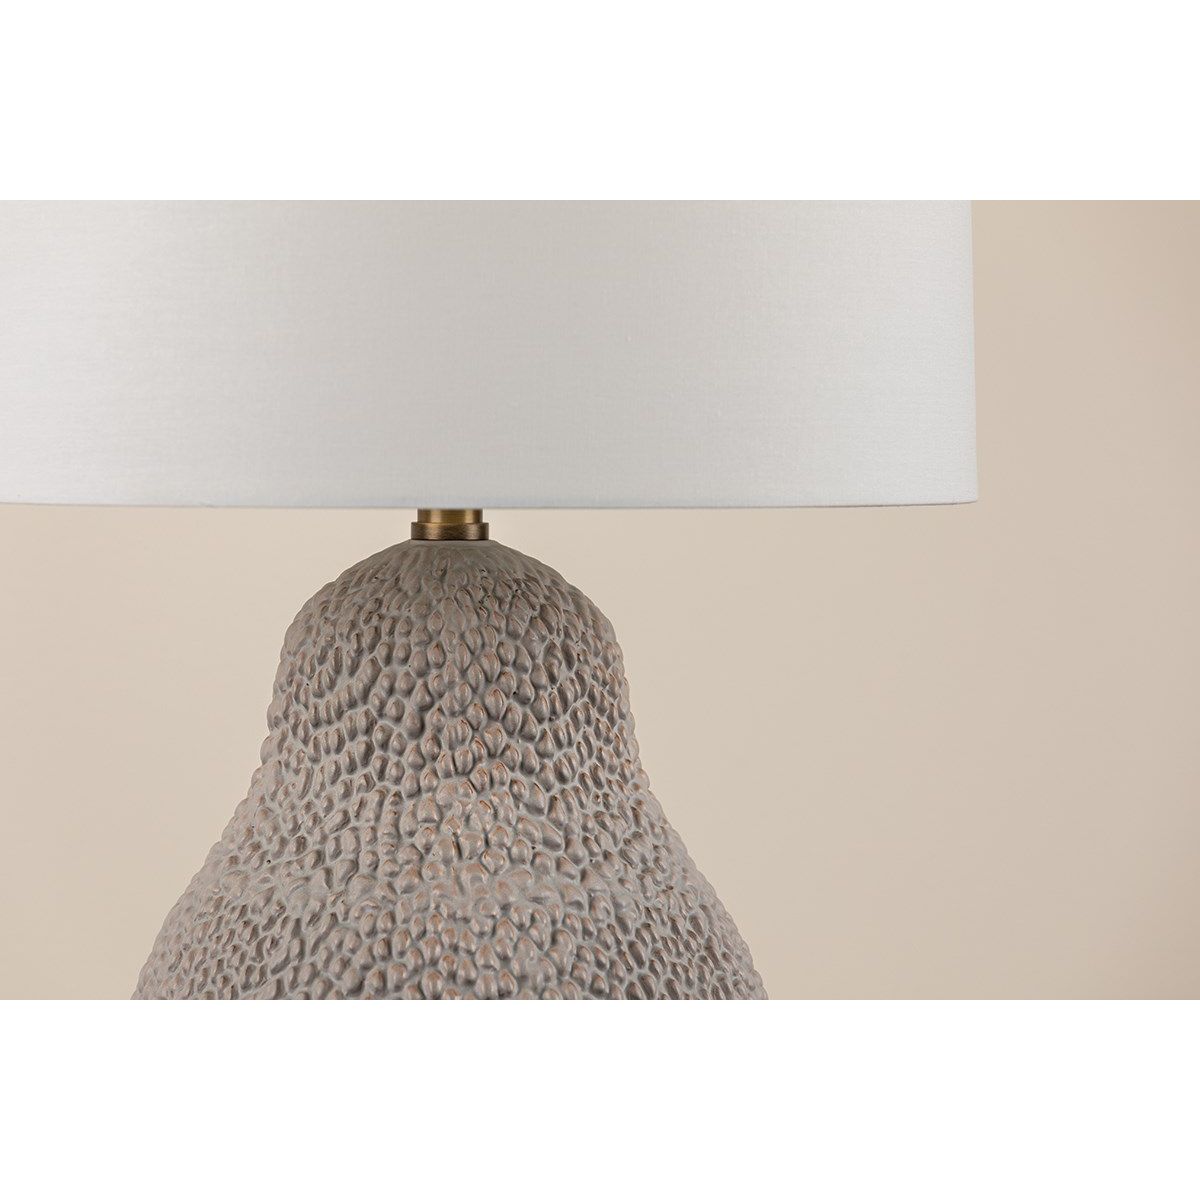 Crater Table Lamp Ceramic Satin White Gold with Patina Brass Accents